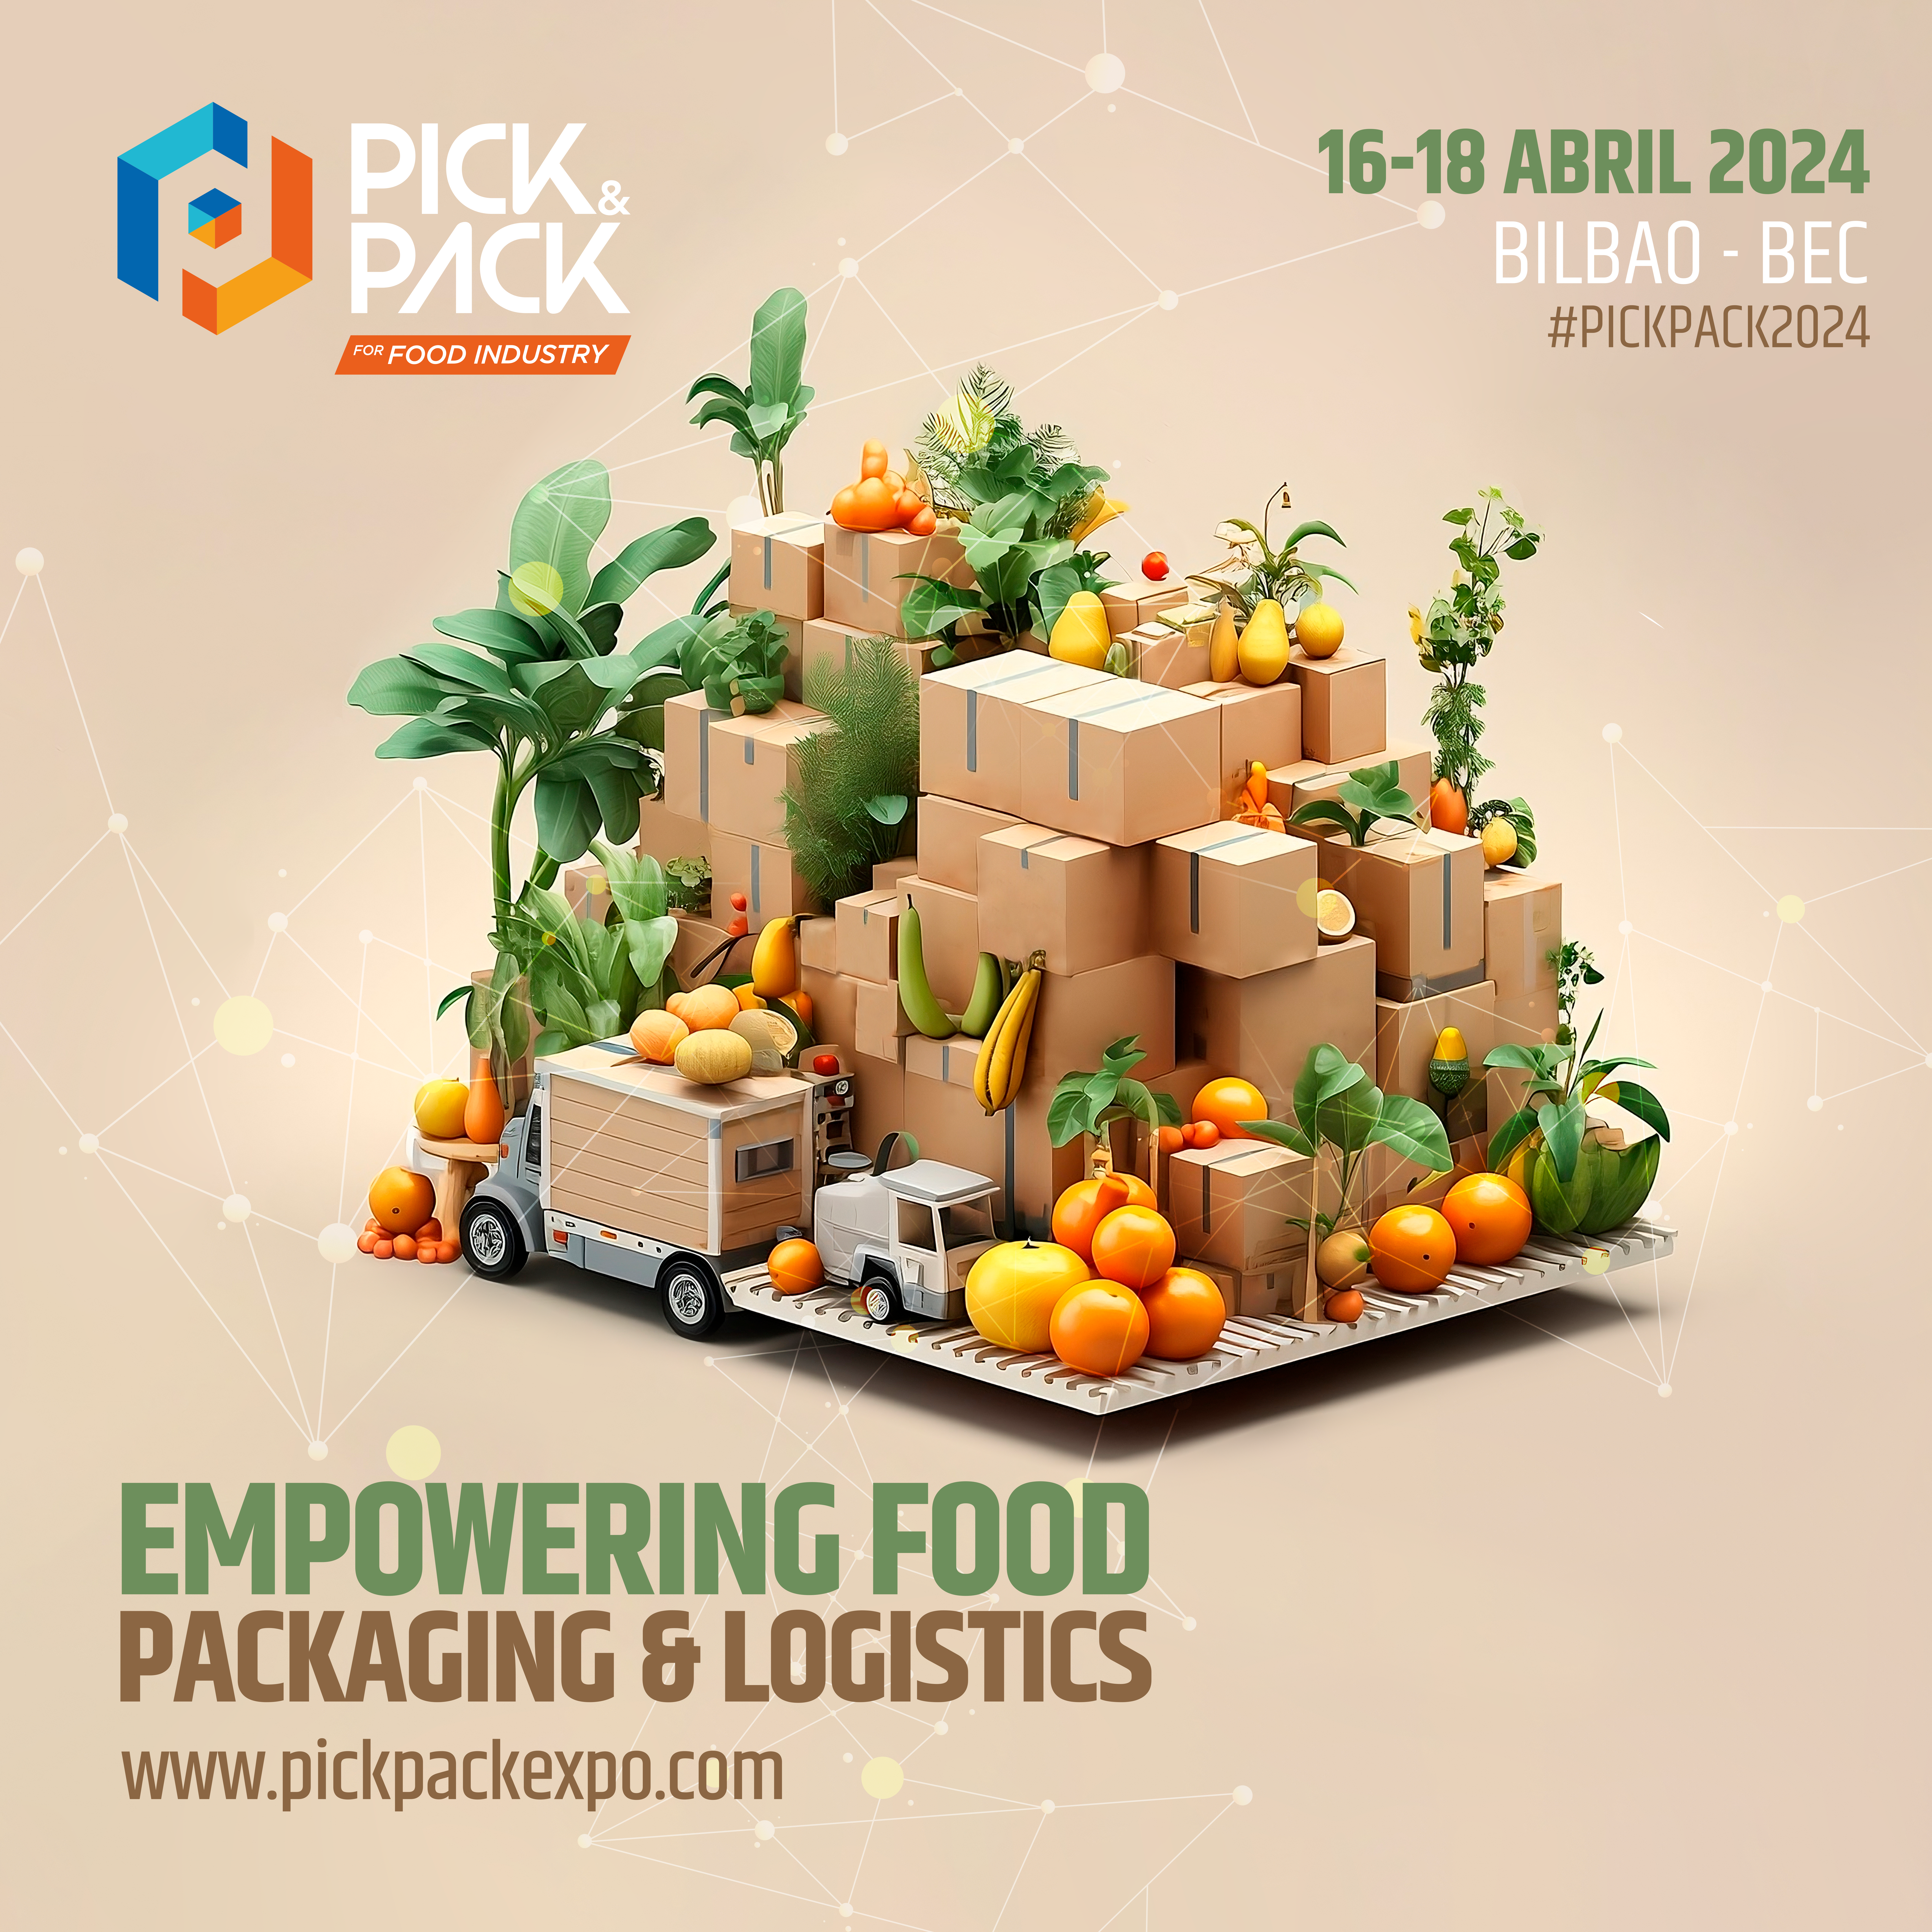 PICK&PACK For Food Industry